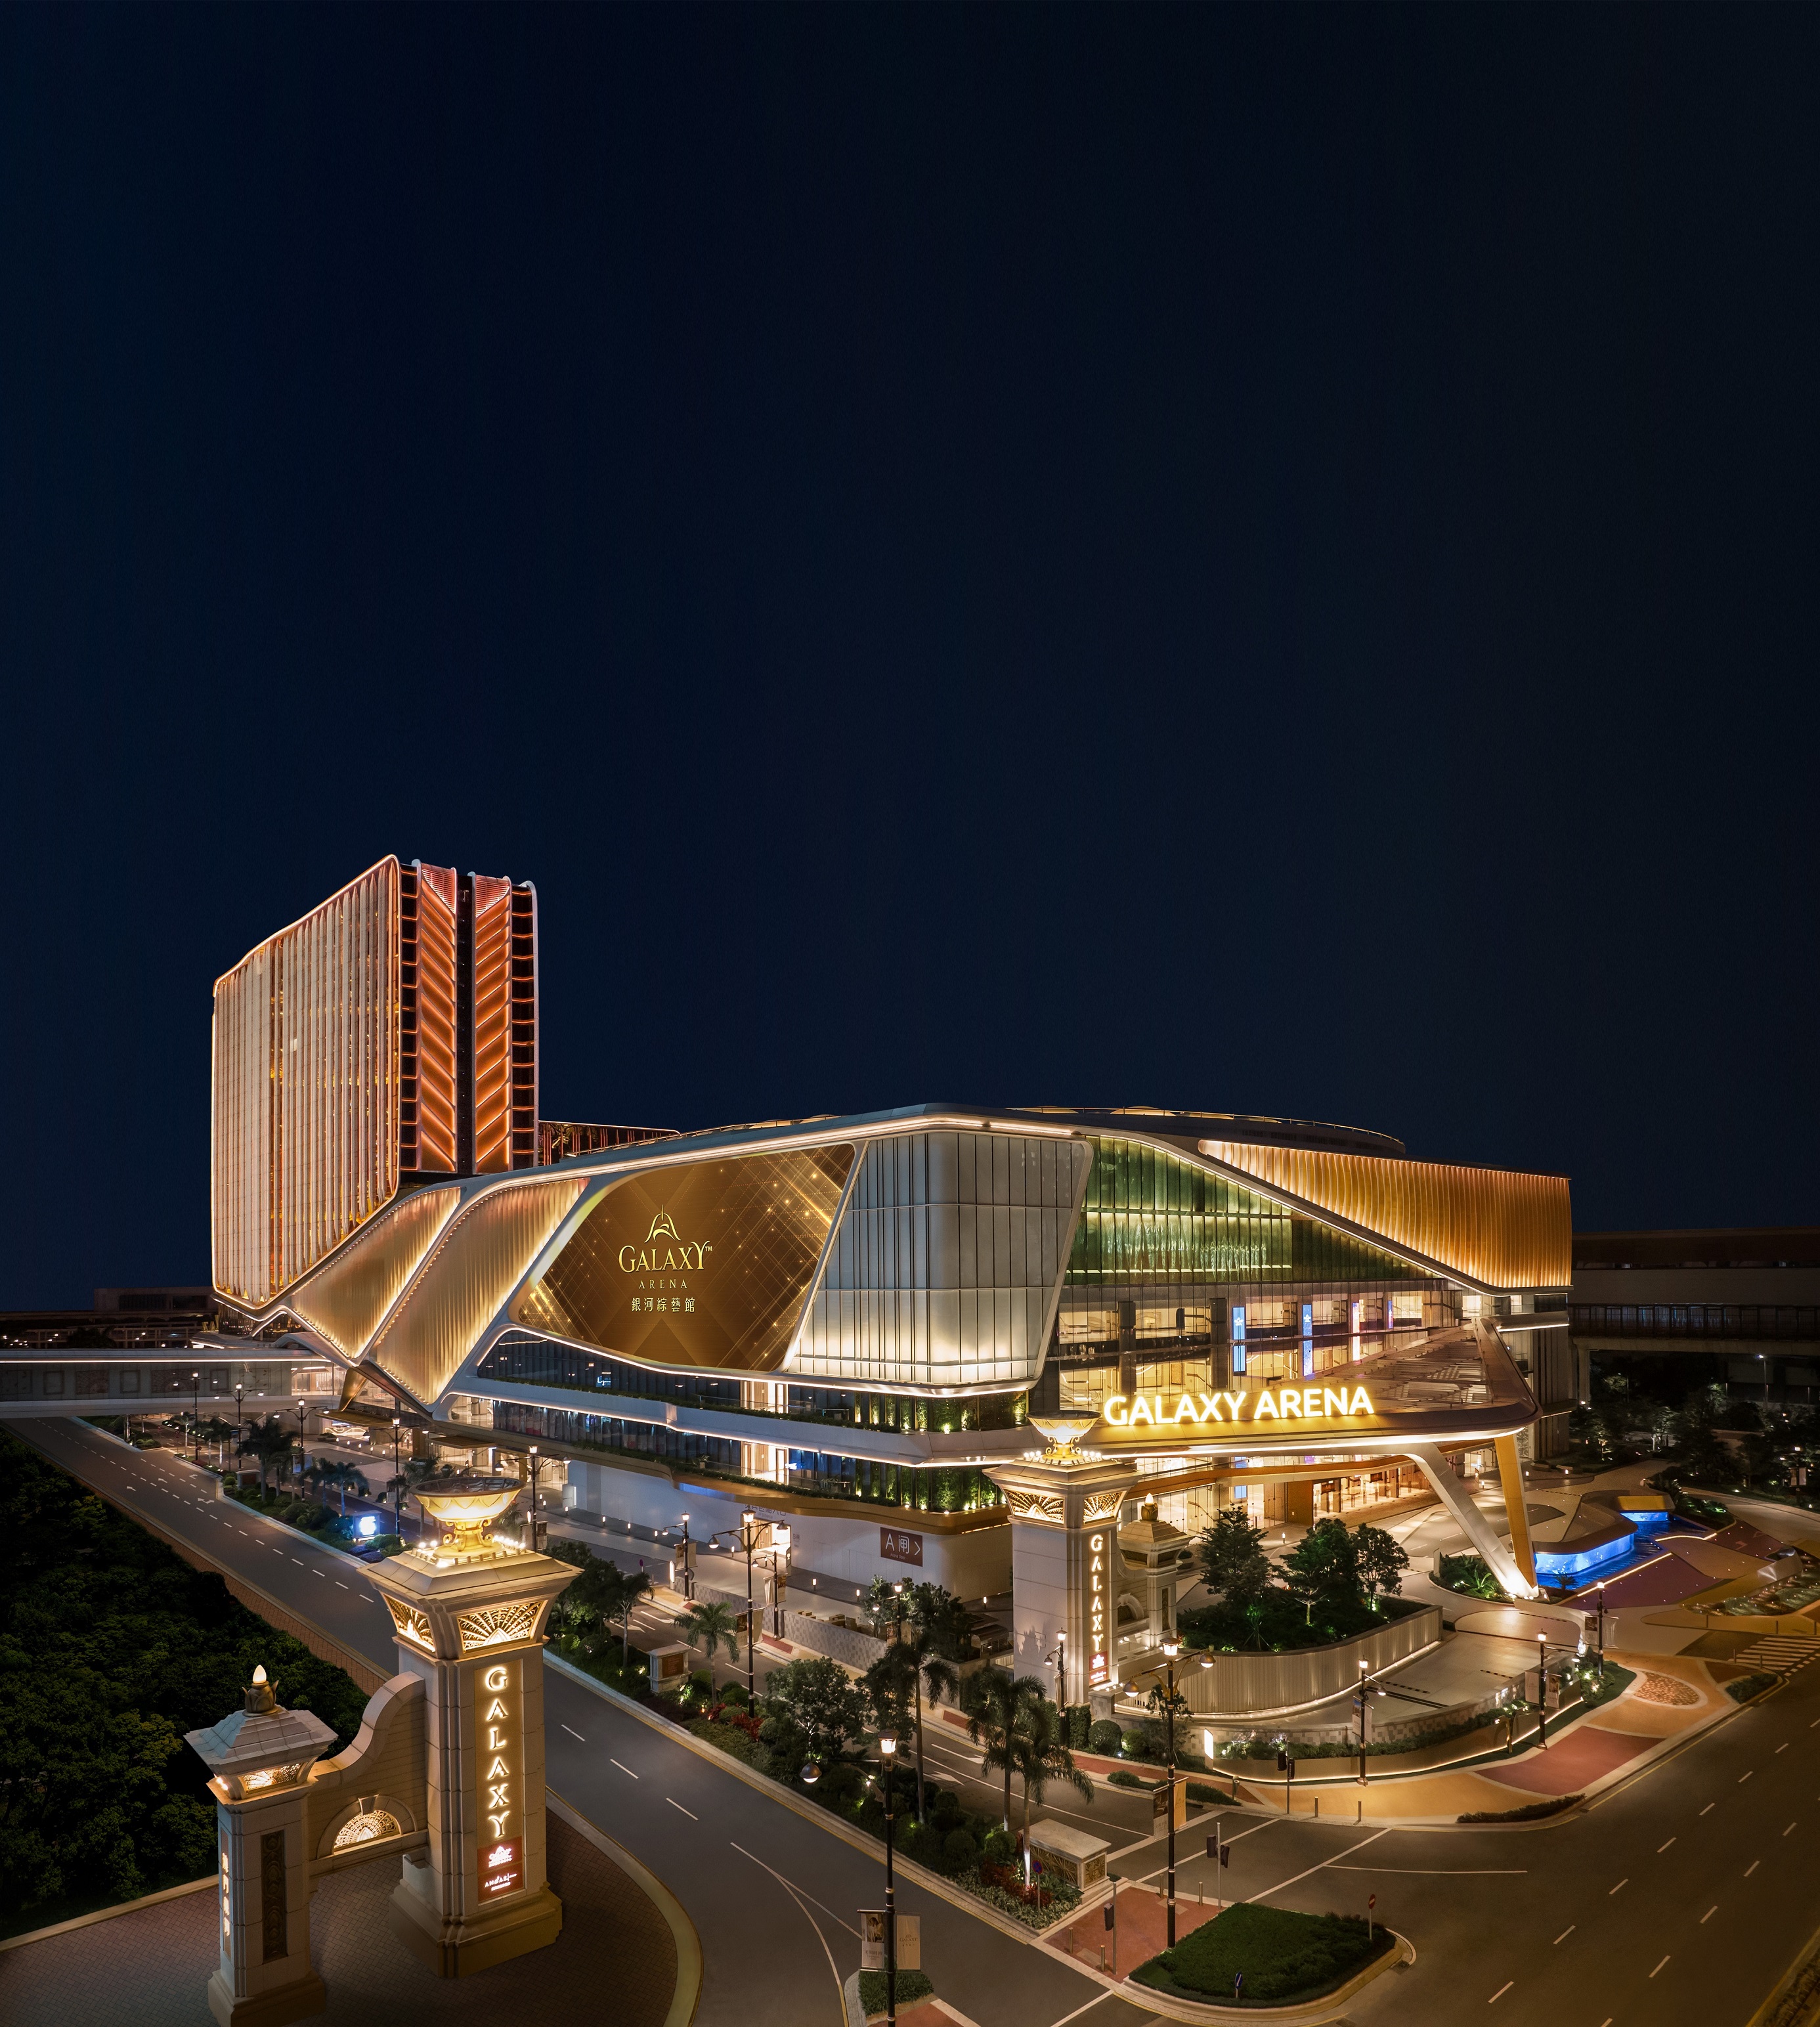 Galaxy Arena, the landmark of art and entertainment in Macau, has been dedicated to delivering endless charm and fun to travelers from all over the world. Since its grand opening last year, it has drawn a string of international performances, including the world-renowned K-Pop superstar BLACKPINK, global megastar Jackson Wang and American rock band One Republic.